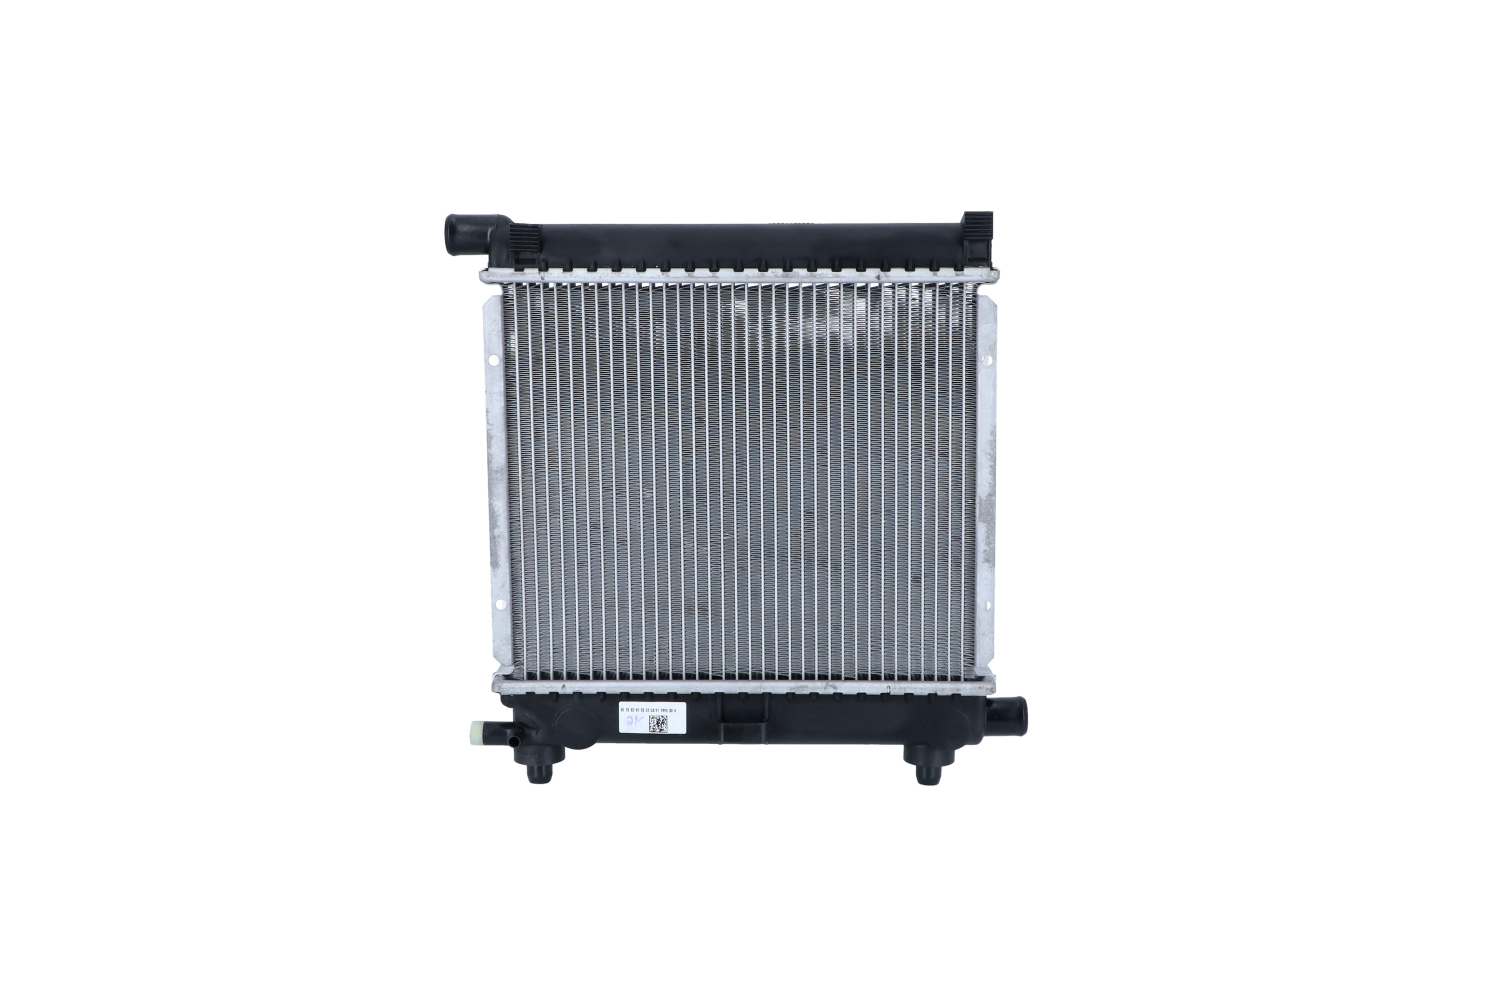 NRF Aluminium, 346 x 293 x 42 mm, with mounting parts, Brazed cooling fins Radiator 507662 buy